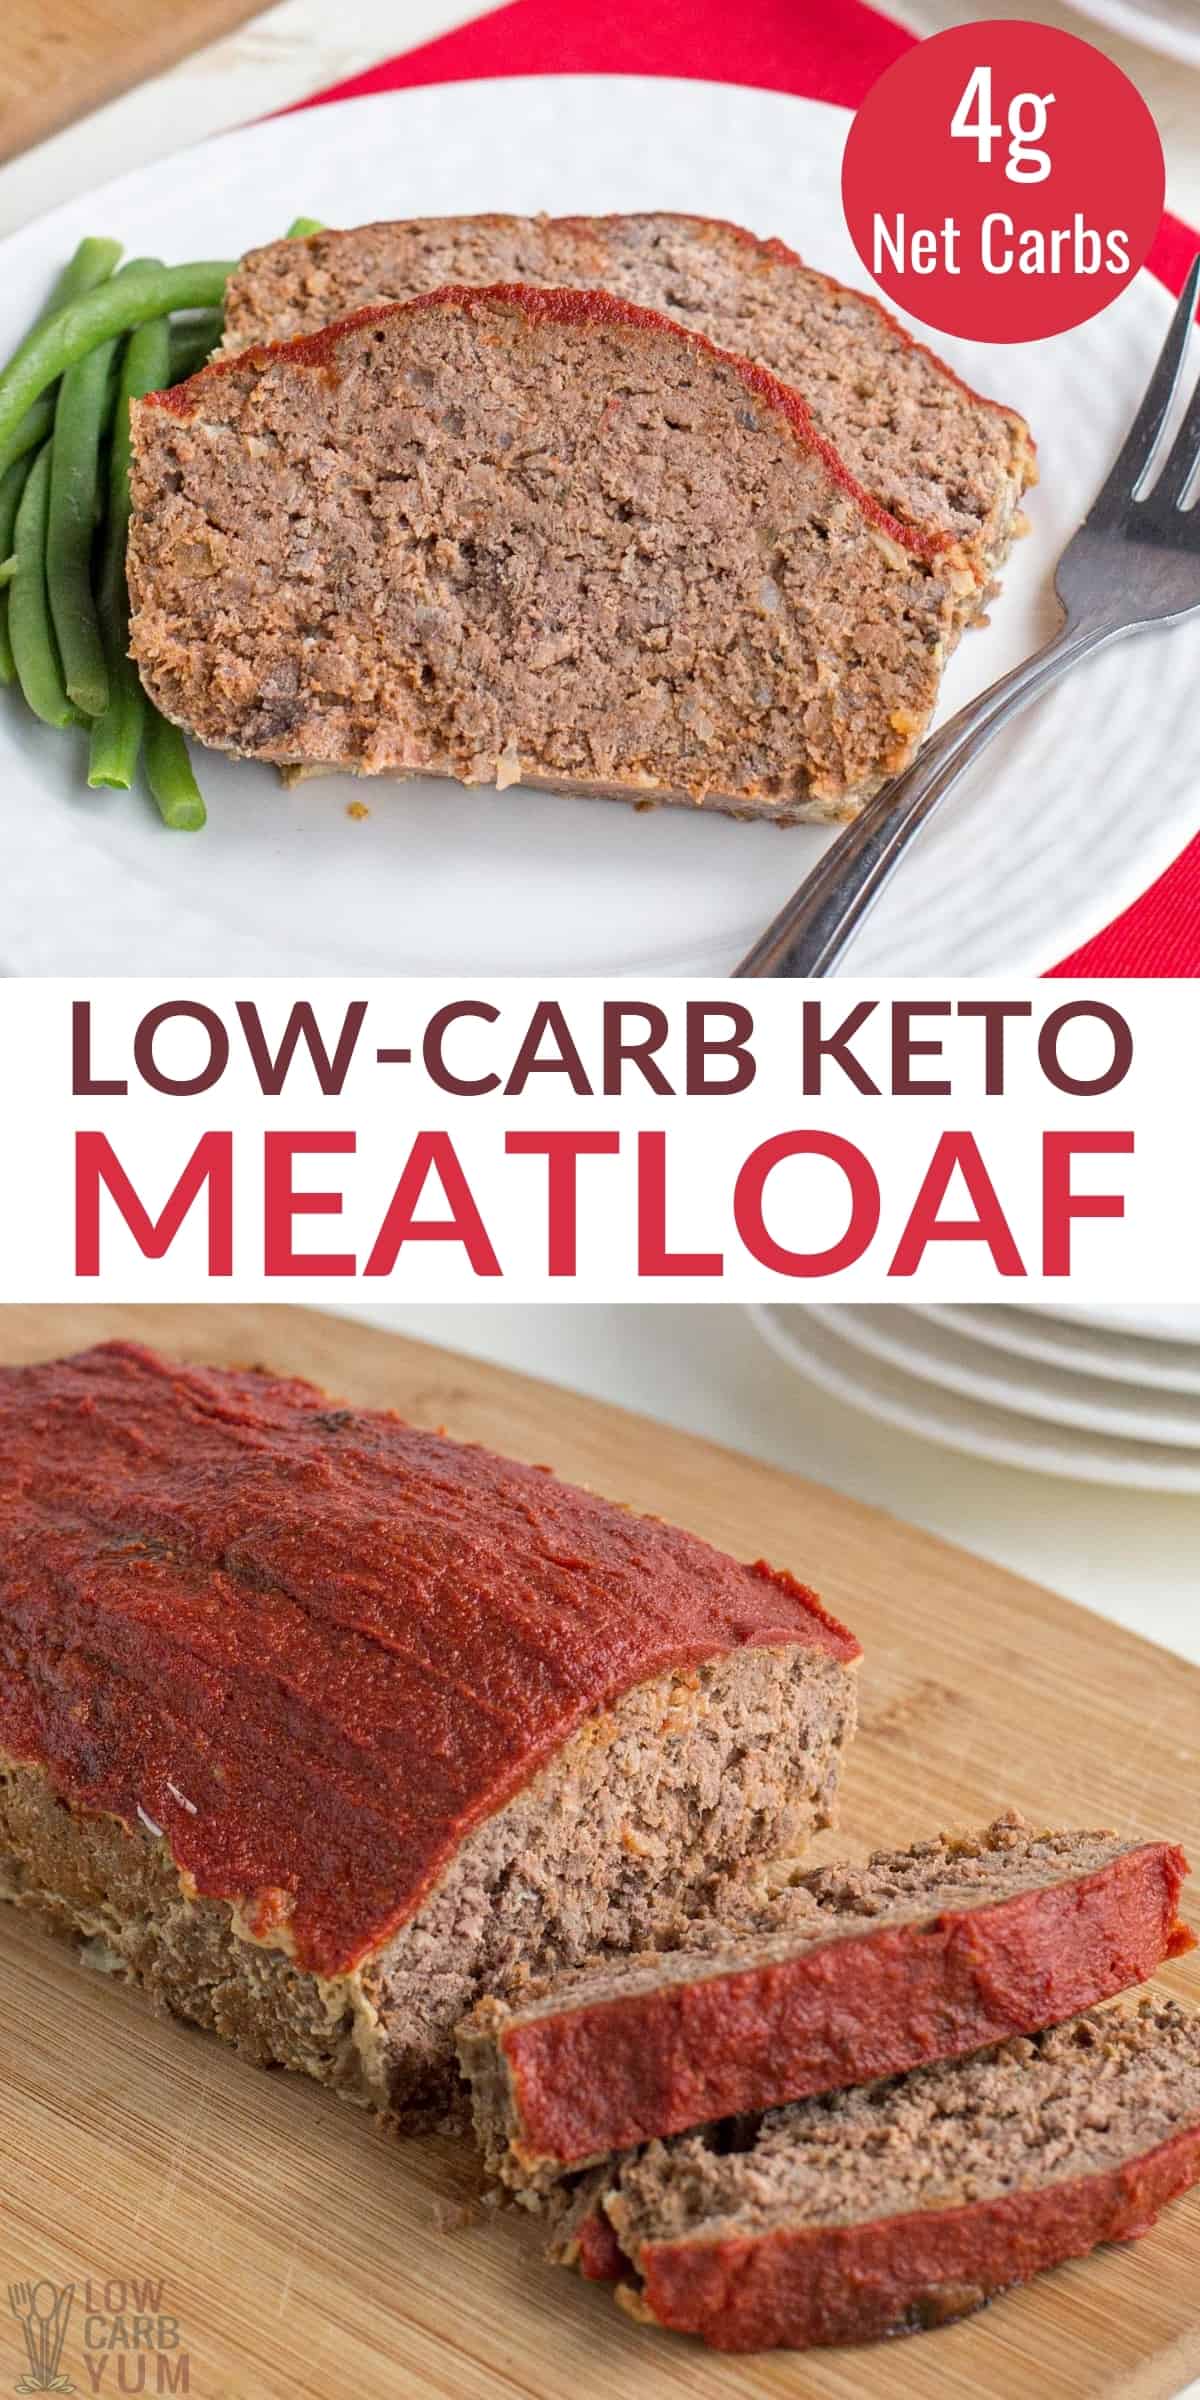 low-carb keto meatloaf recipe